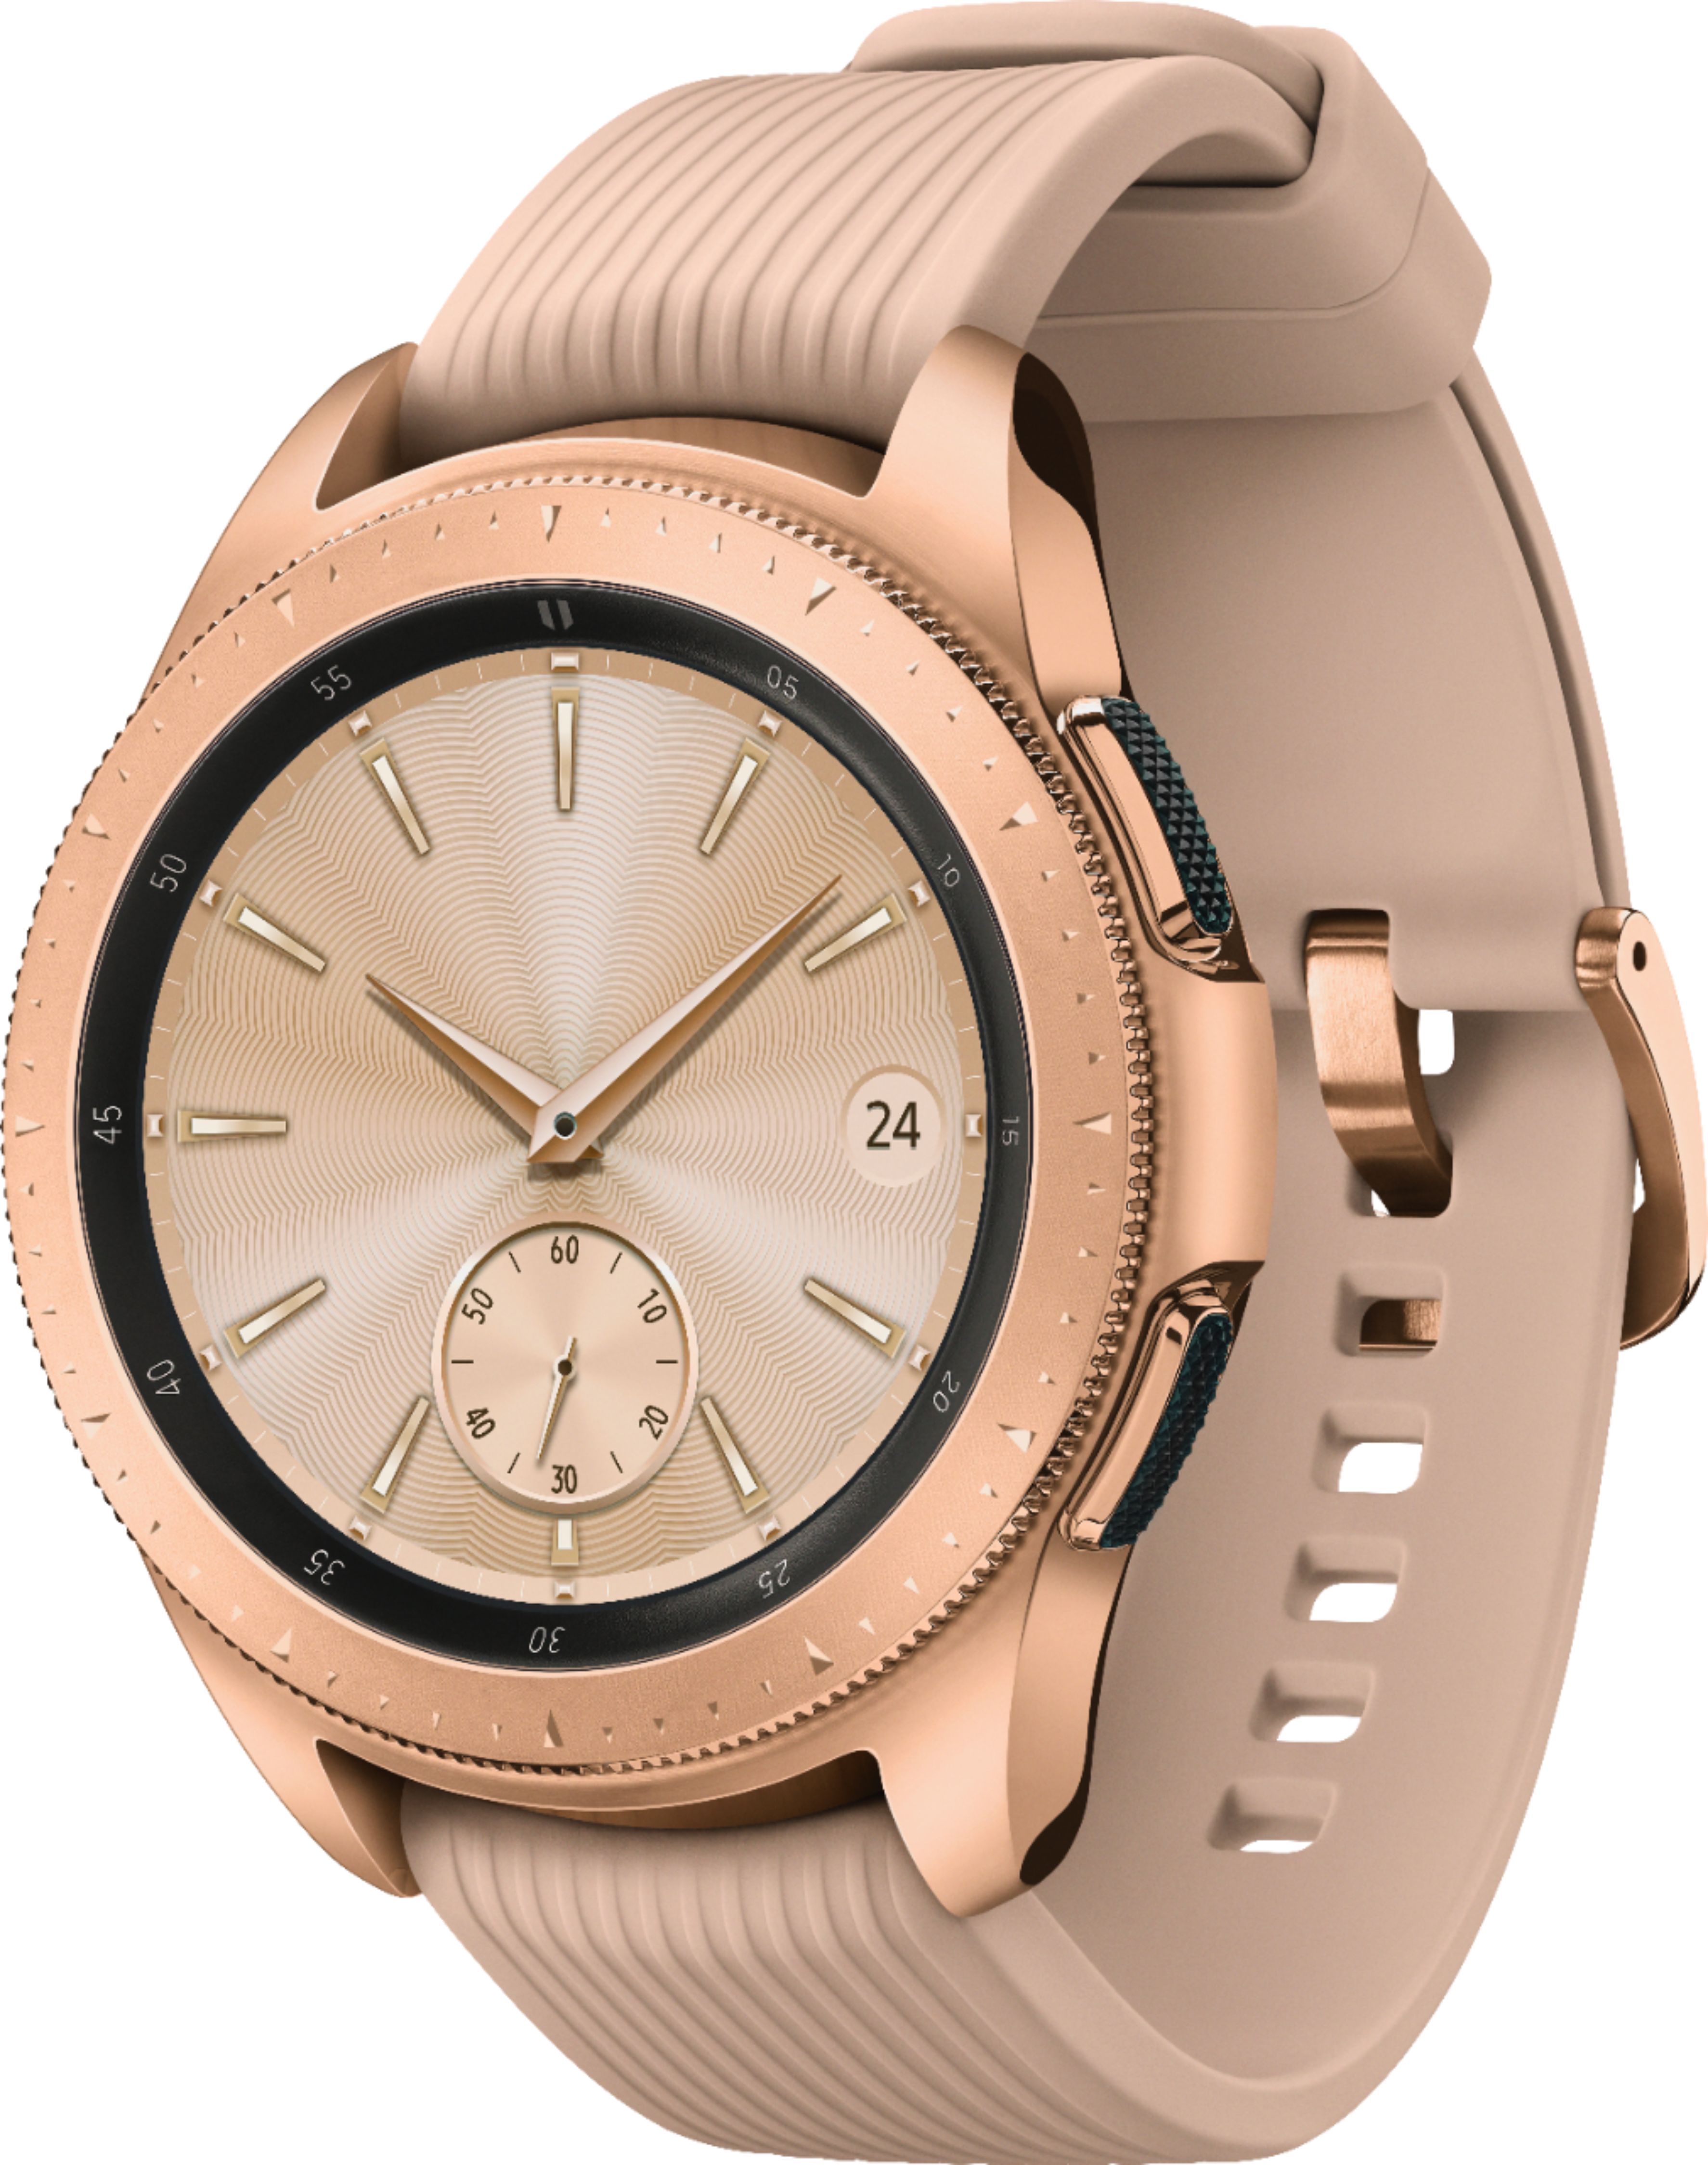 galaxy watch rose gold with black band